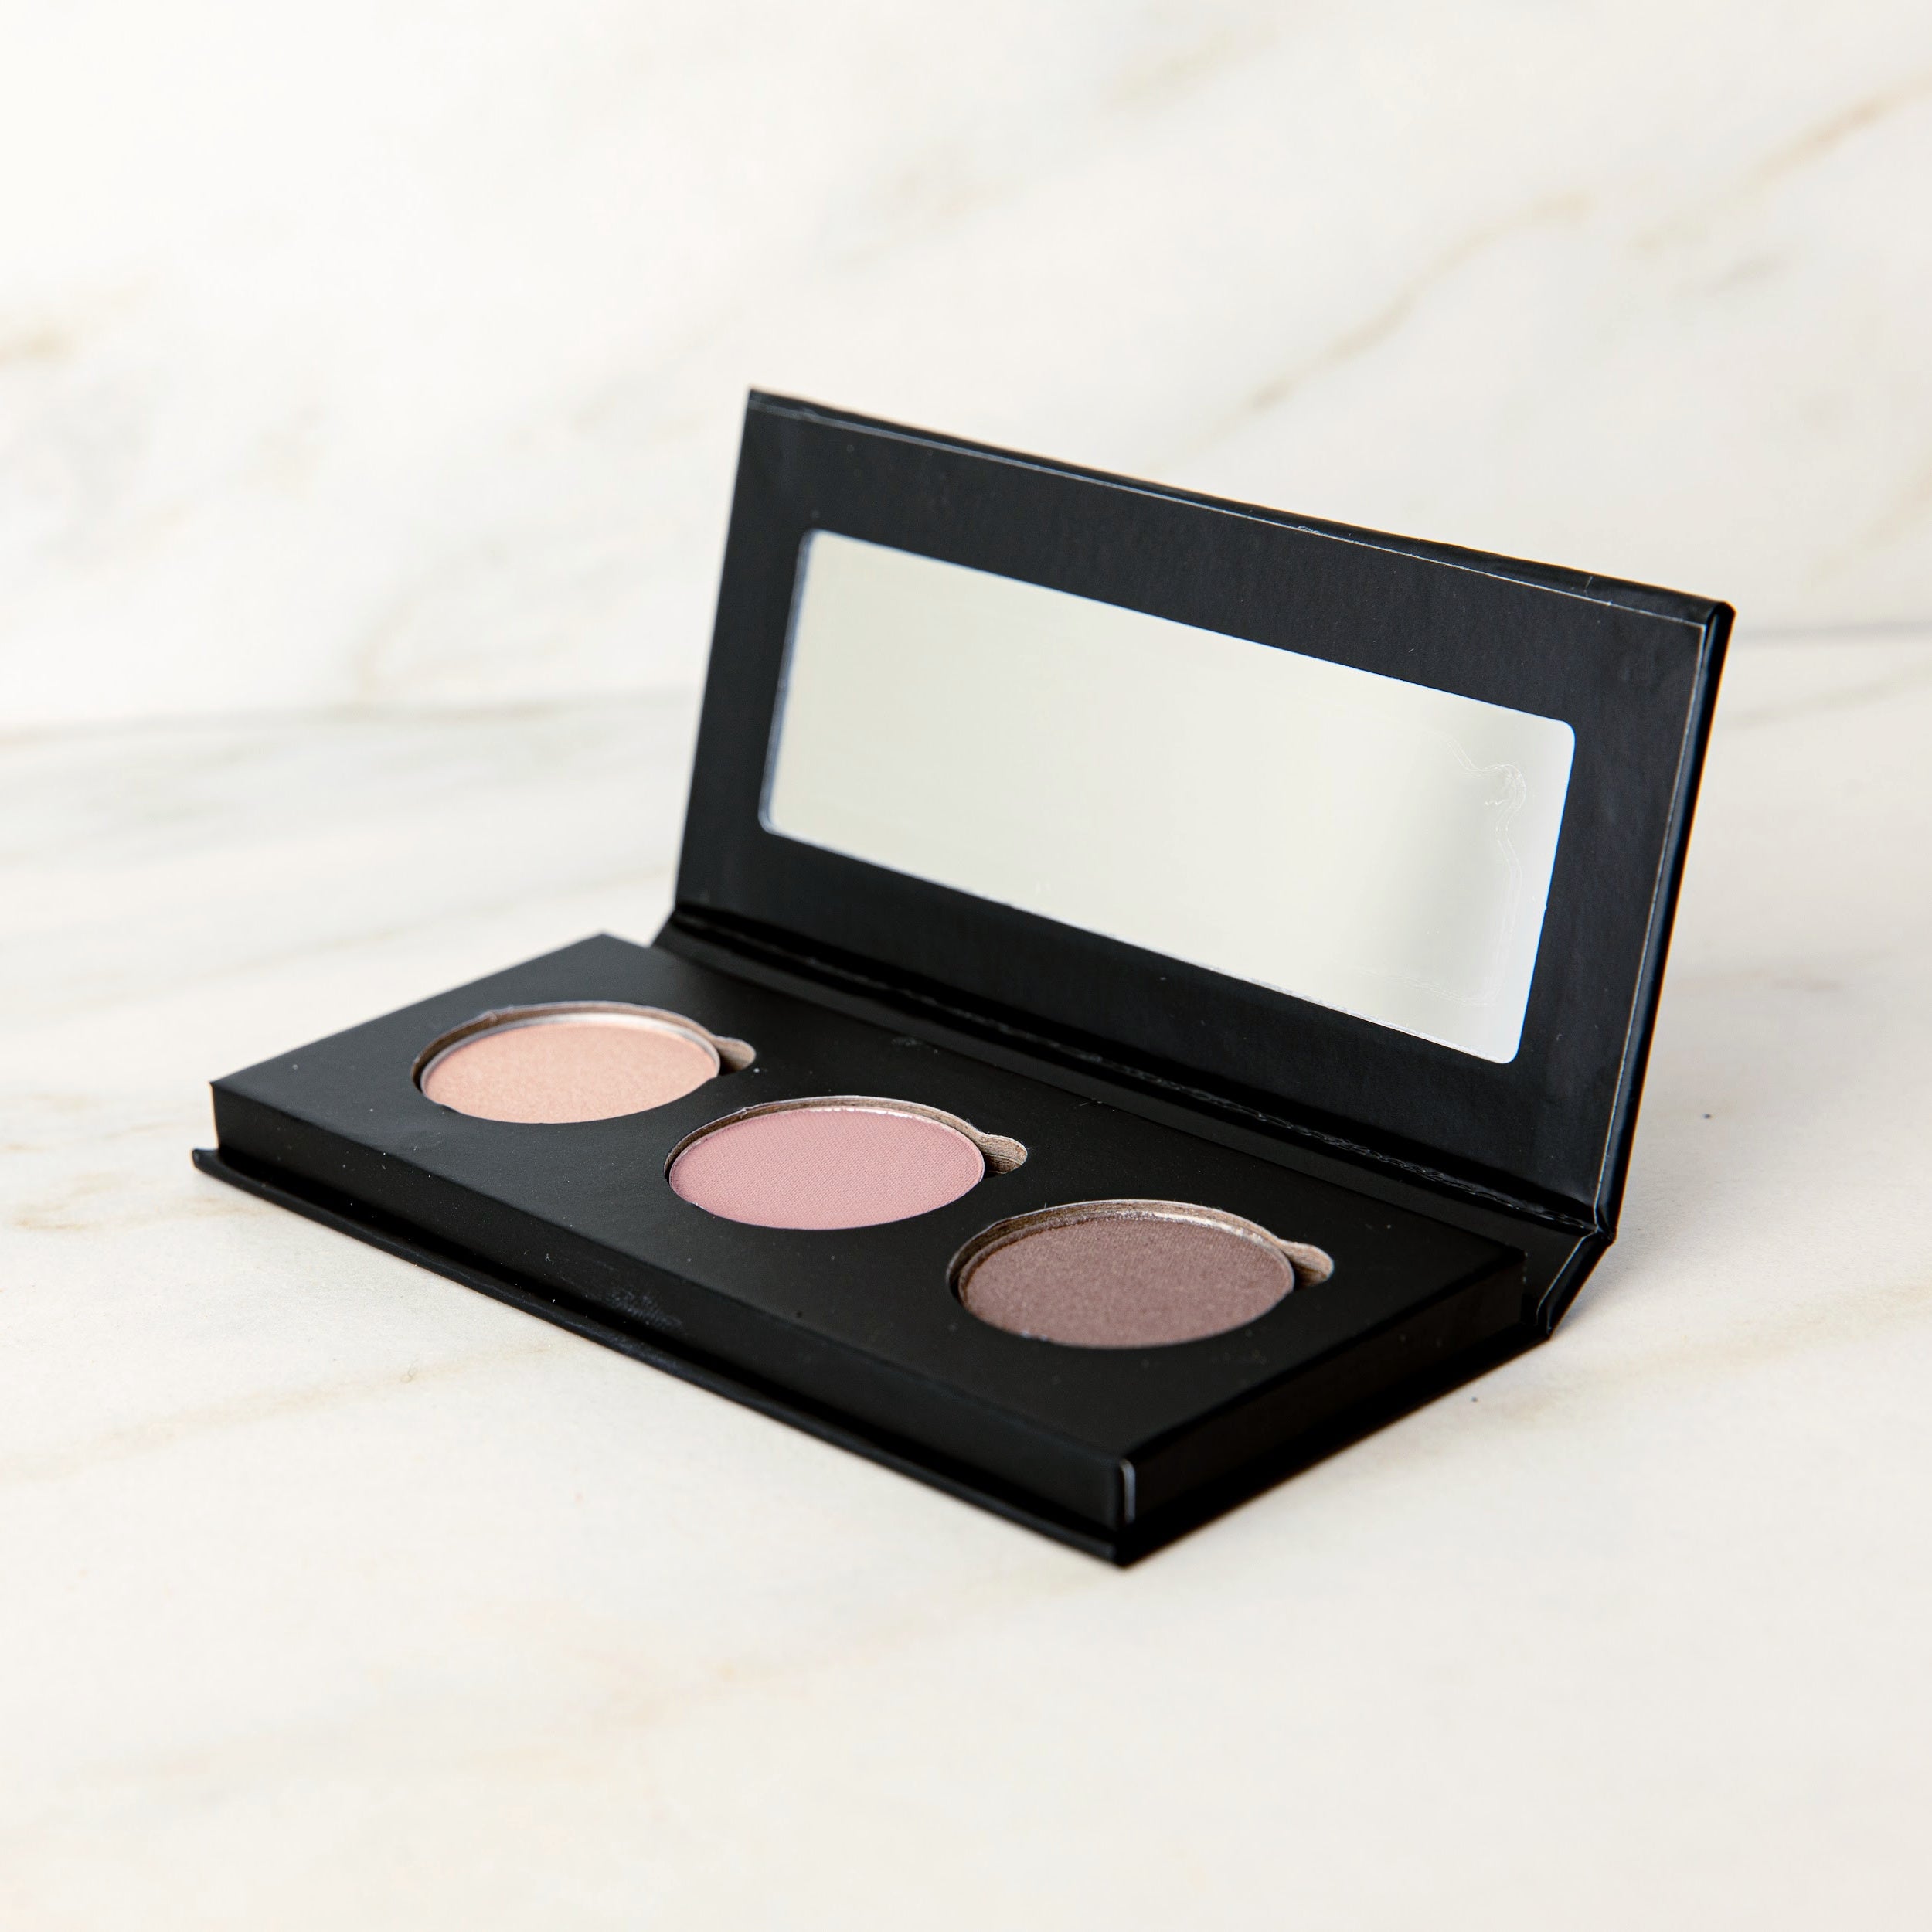 Makeup and Eye Co – Toups Palette Natural Organics